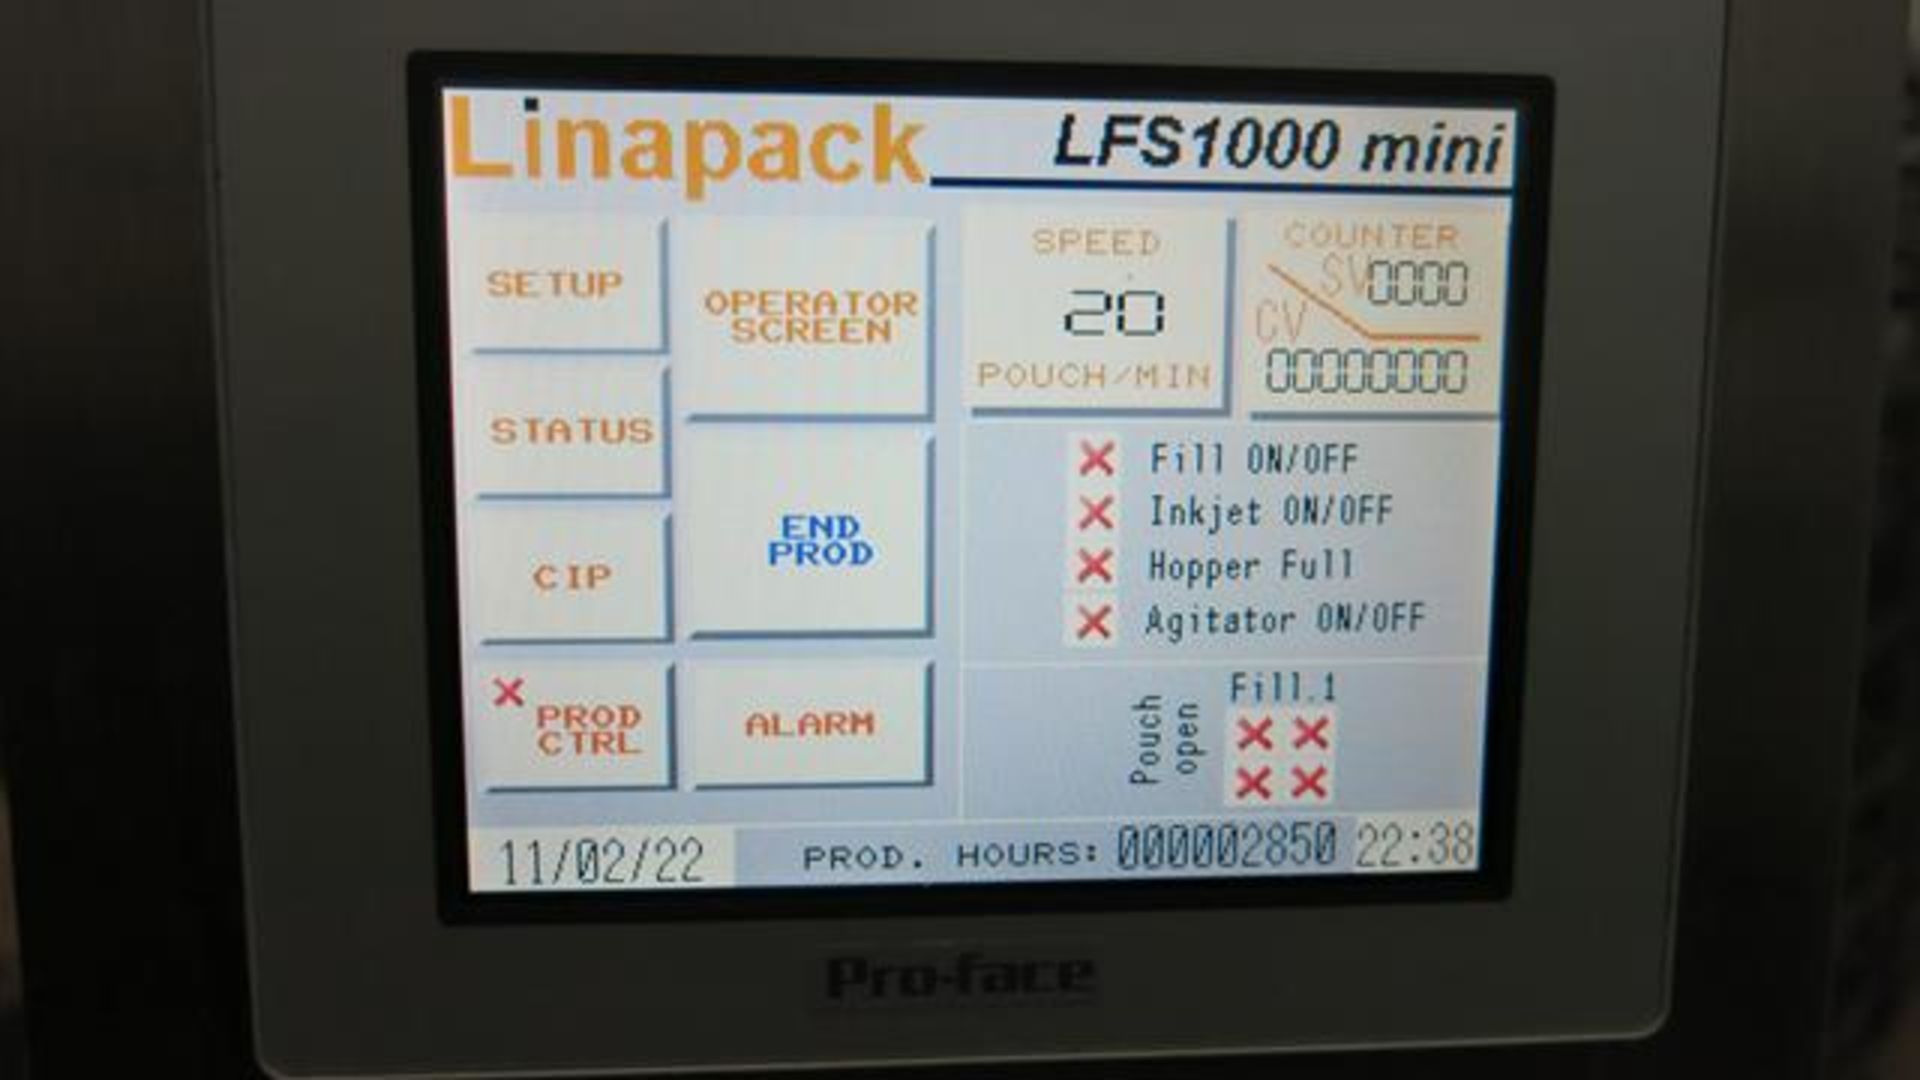 LINAPACK, LFS-1000 MINI, STAINLESS STEEL, STAND-UP POUCH, FILL AND SEAL MACHINE, POUCH INFEED - Image 14 of 22